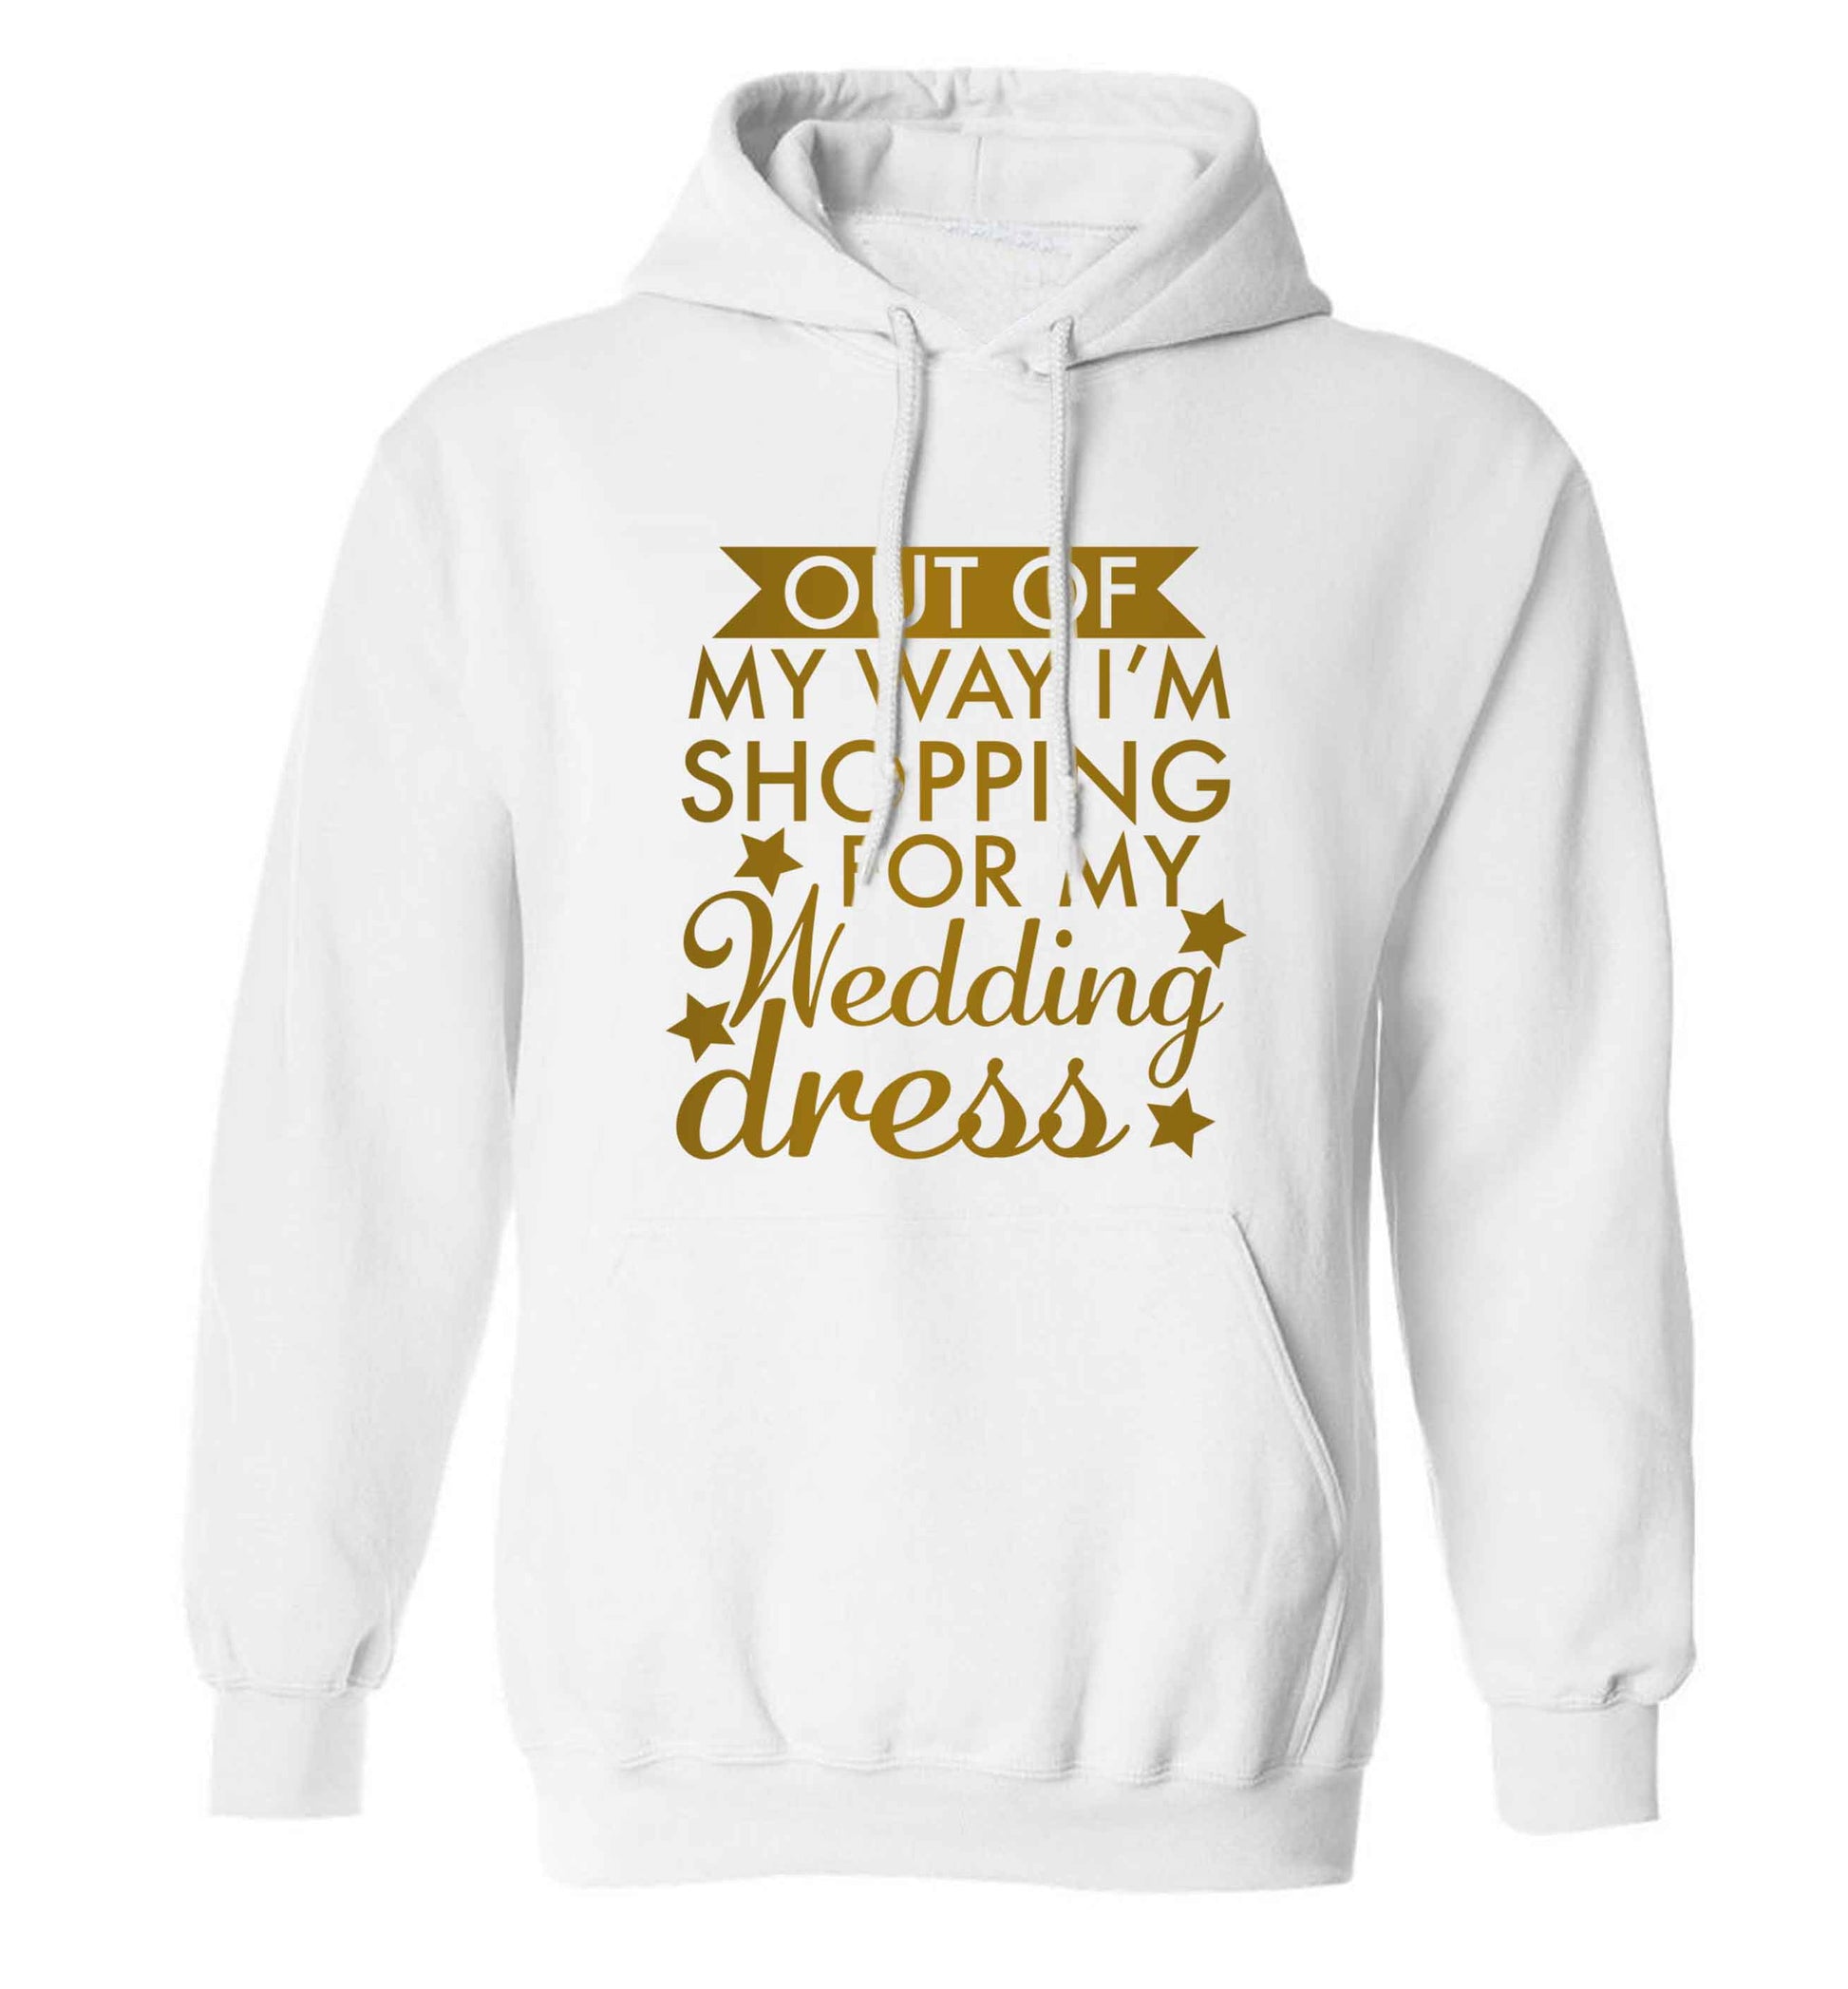 Out of my way I'm shopping for my wedding dress adults unisex white hoodie 2XL